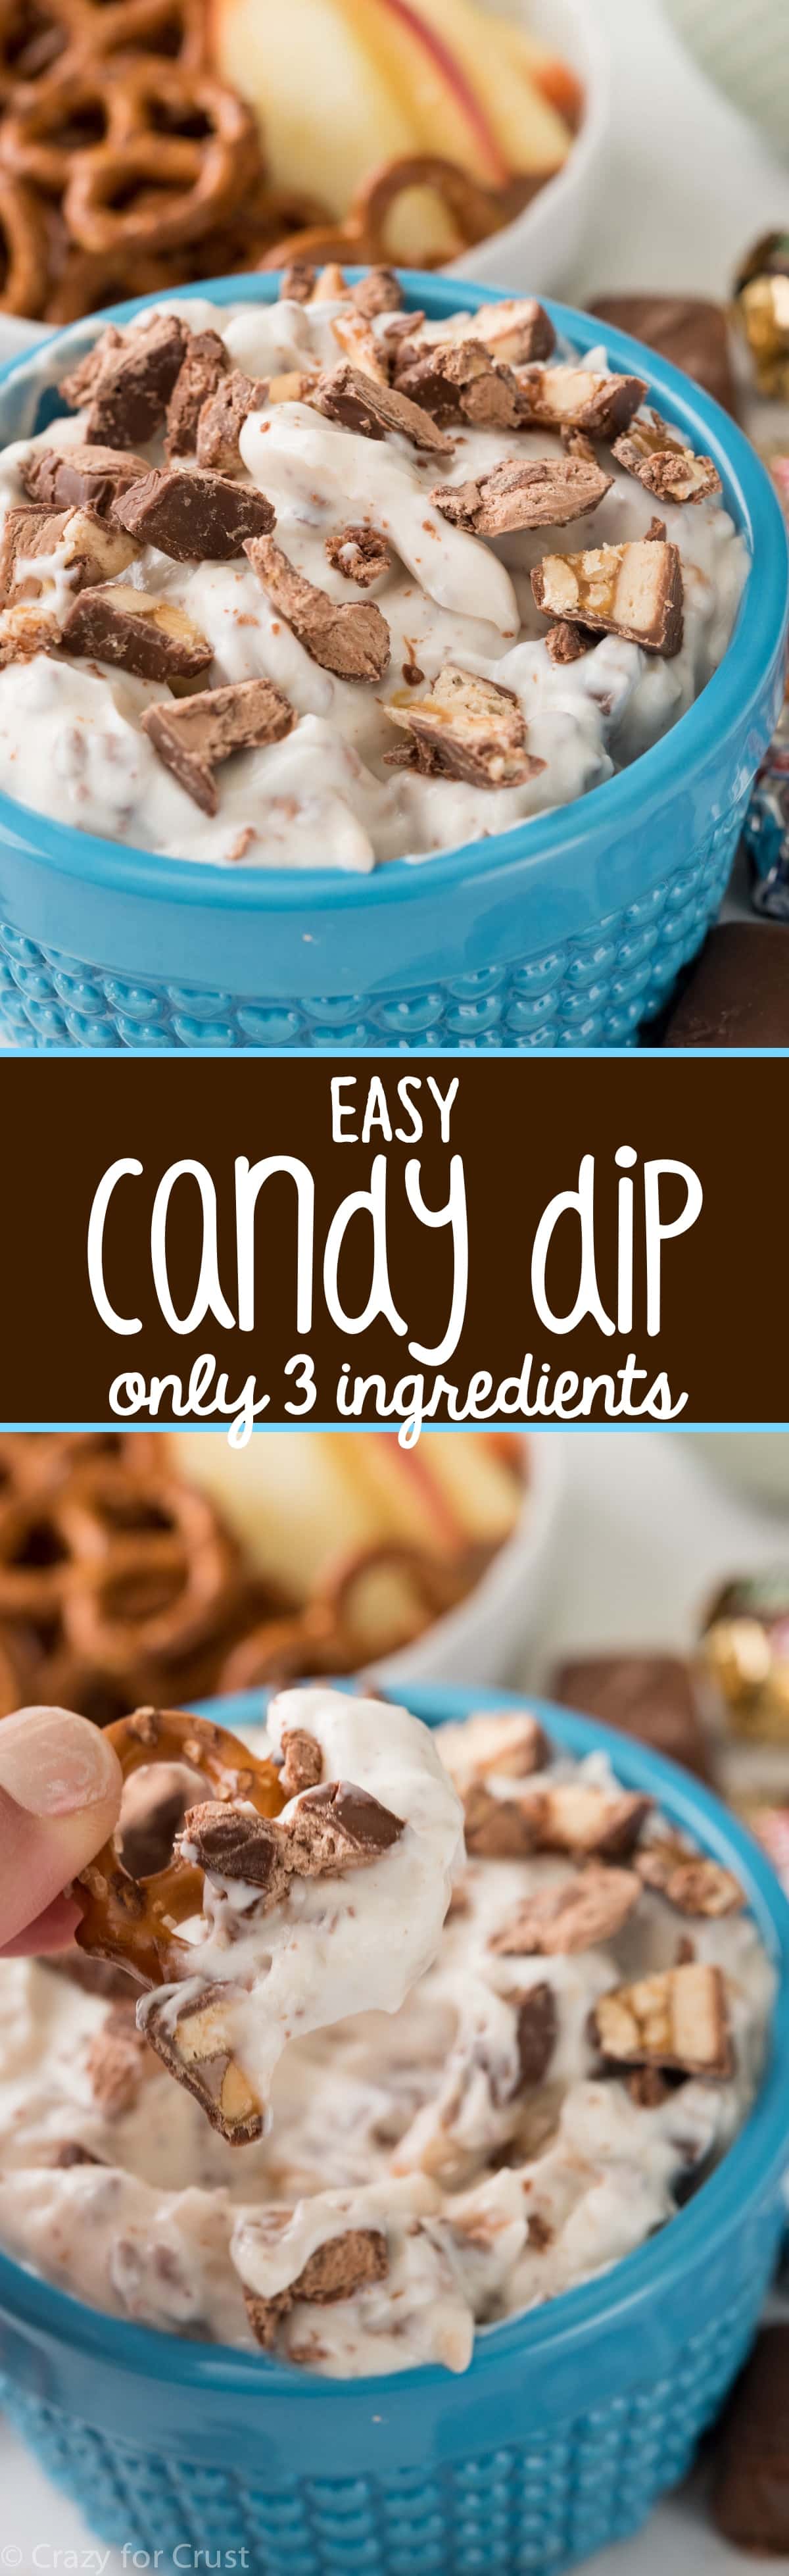 This easy Skinny Candy Dip has only 3 ingredients! It's a fast and easy recipe that's the perfect party dip!